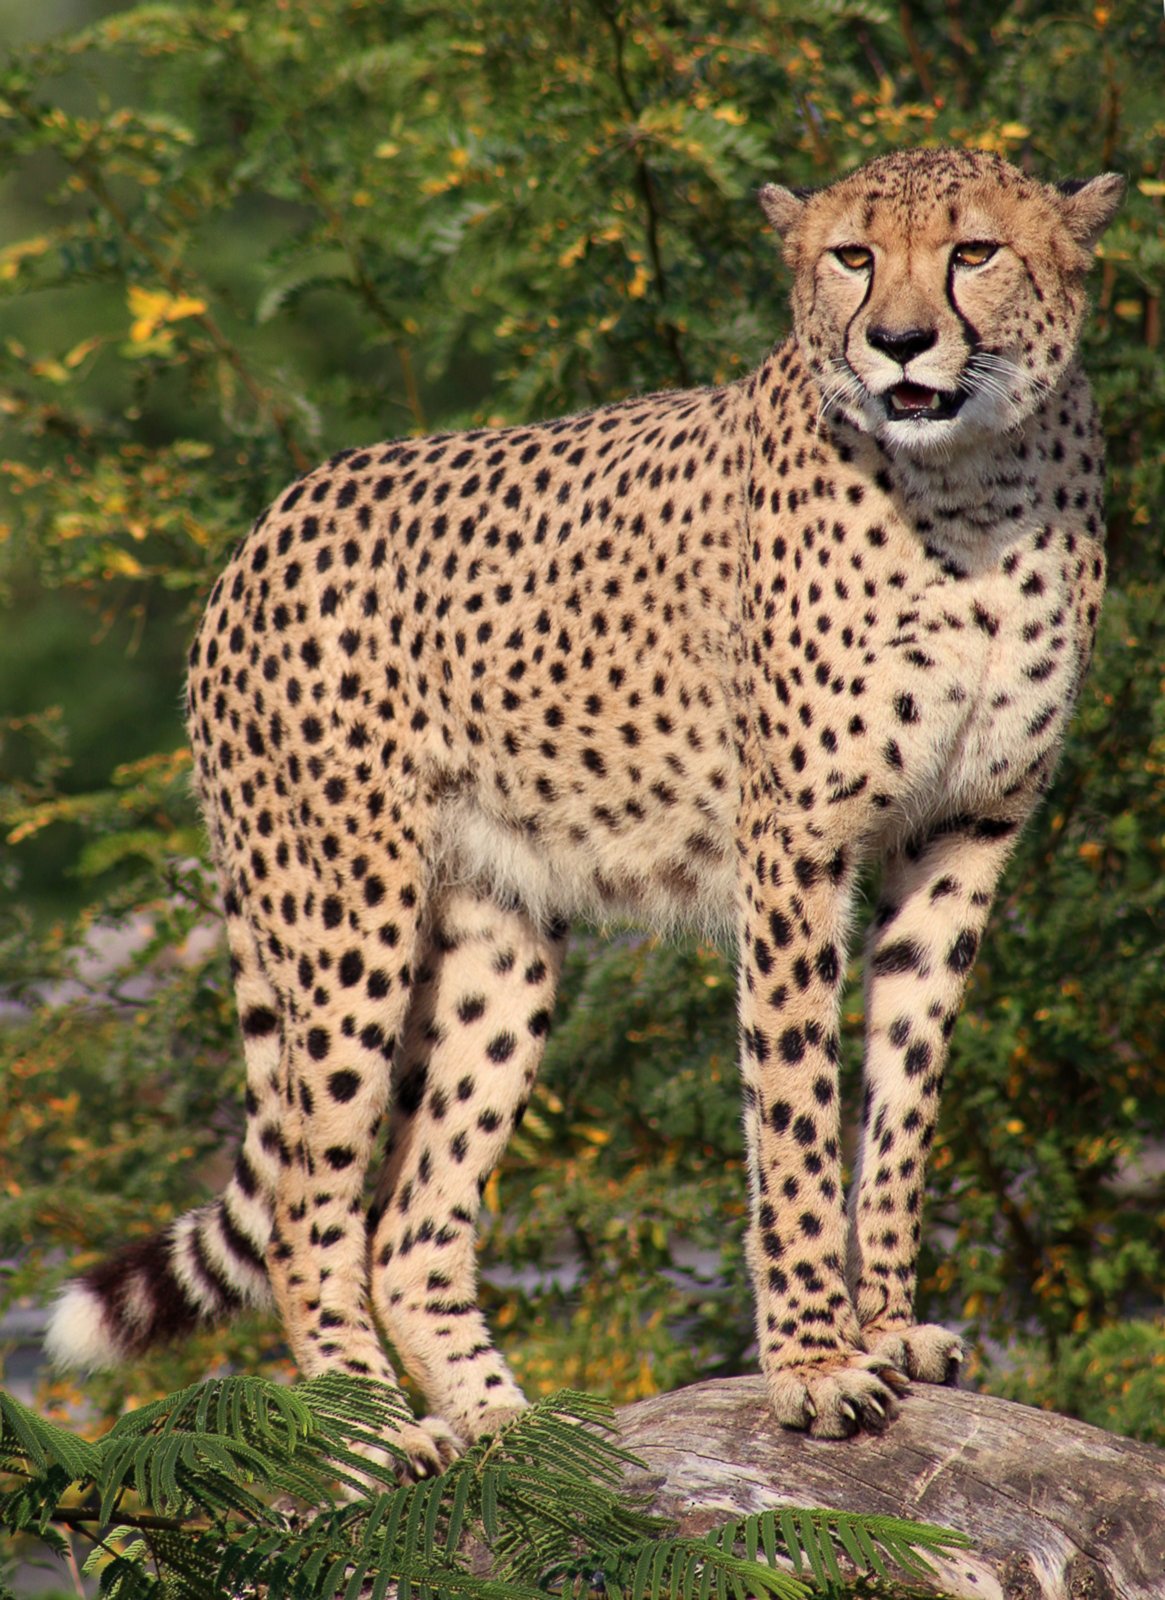 PHOTO: Pictured is the cheetah who escaped from an enclosure at the Indianapolis Zoo. The 4-year-old, named Pounce, came to Indianapolis from the San Diego Zoo.